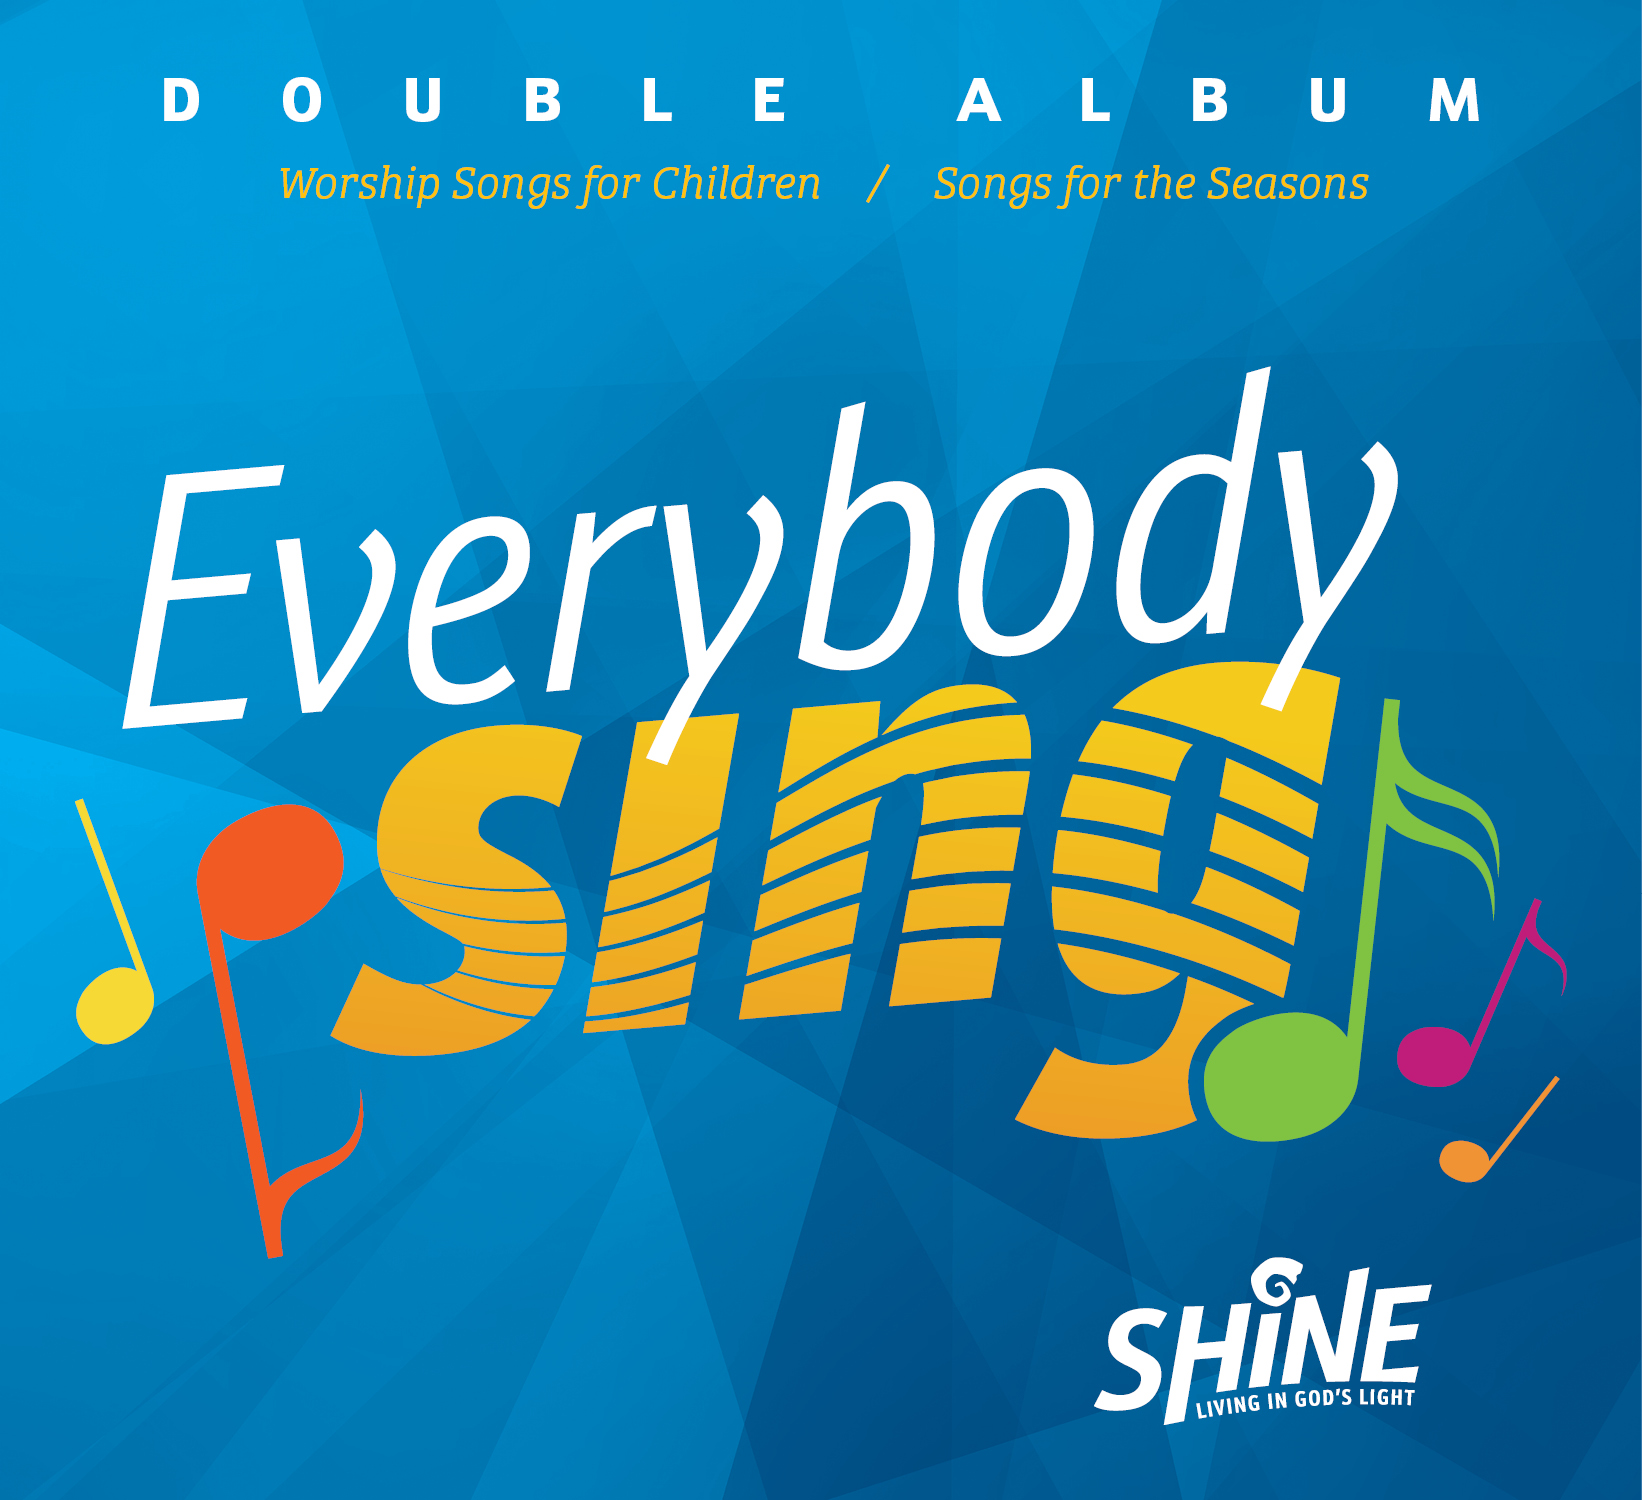 Everybody Sing double album (CD or download)